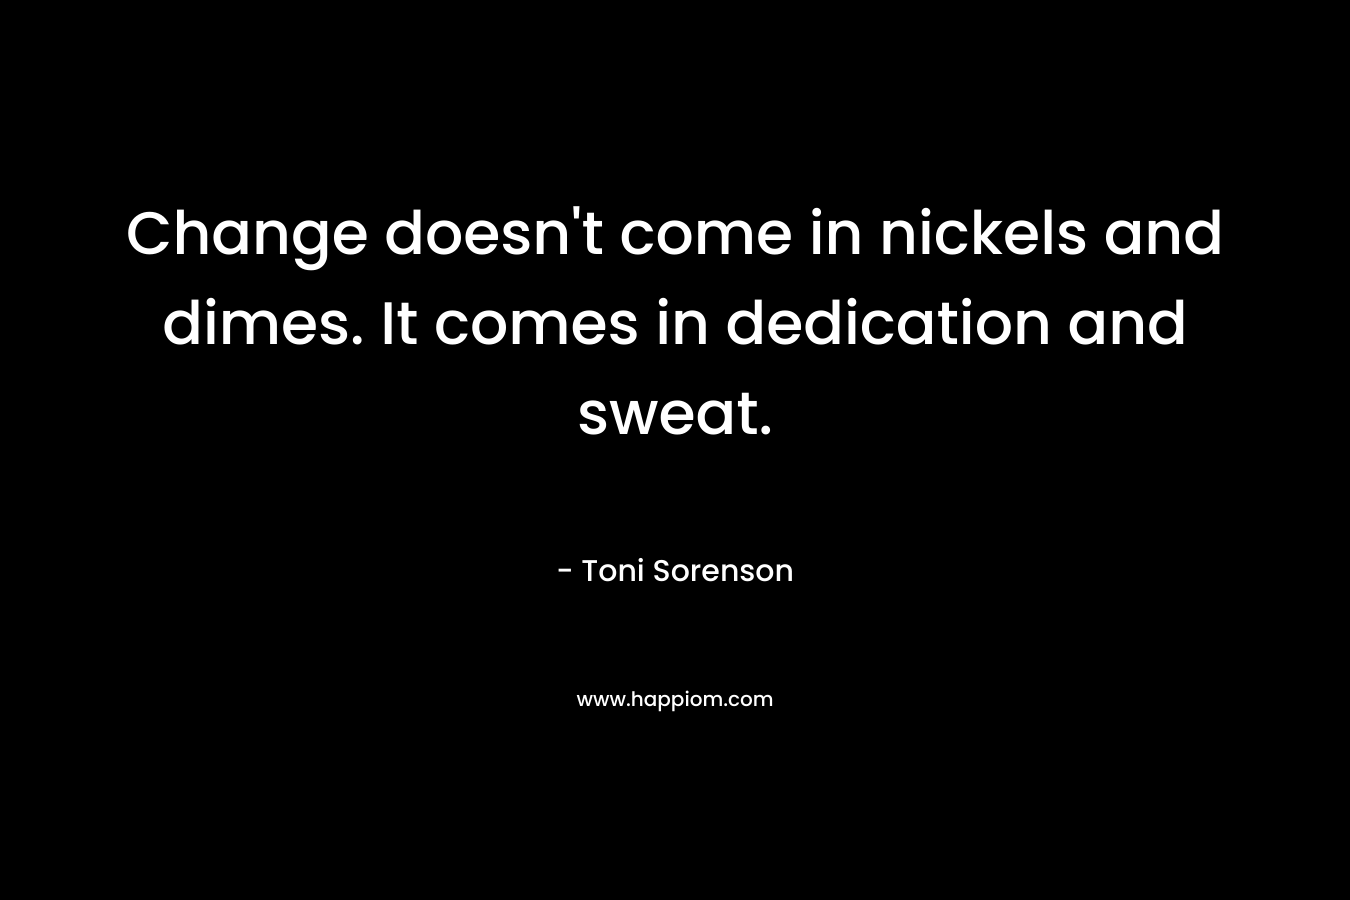 Change doesn't come in nickels and dimes. It comes in dedication and sweat.